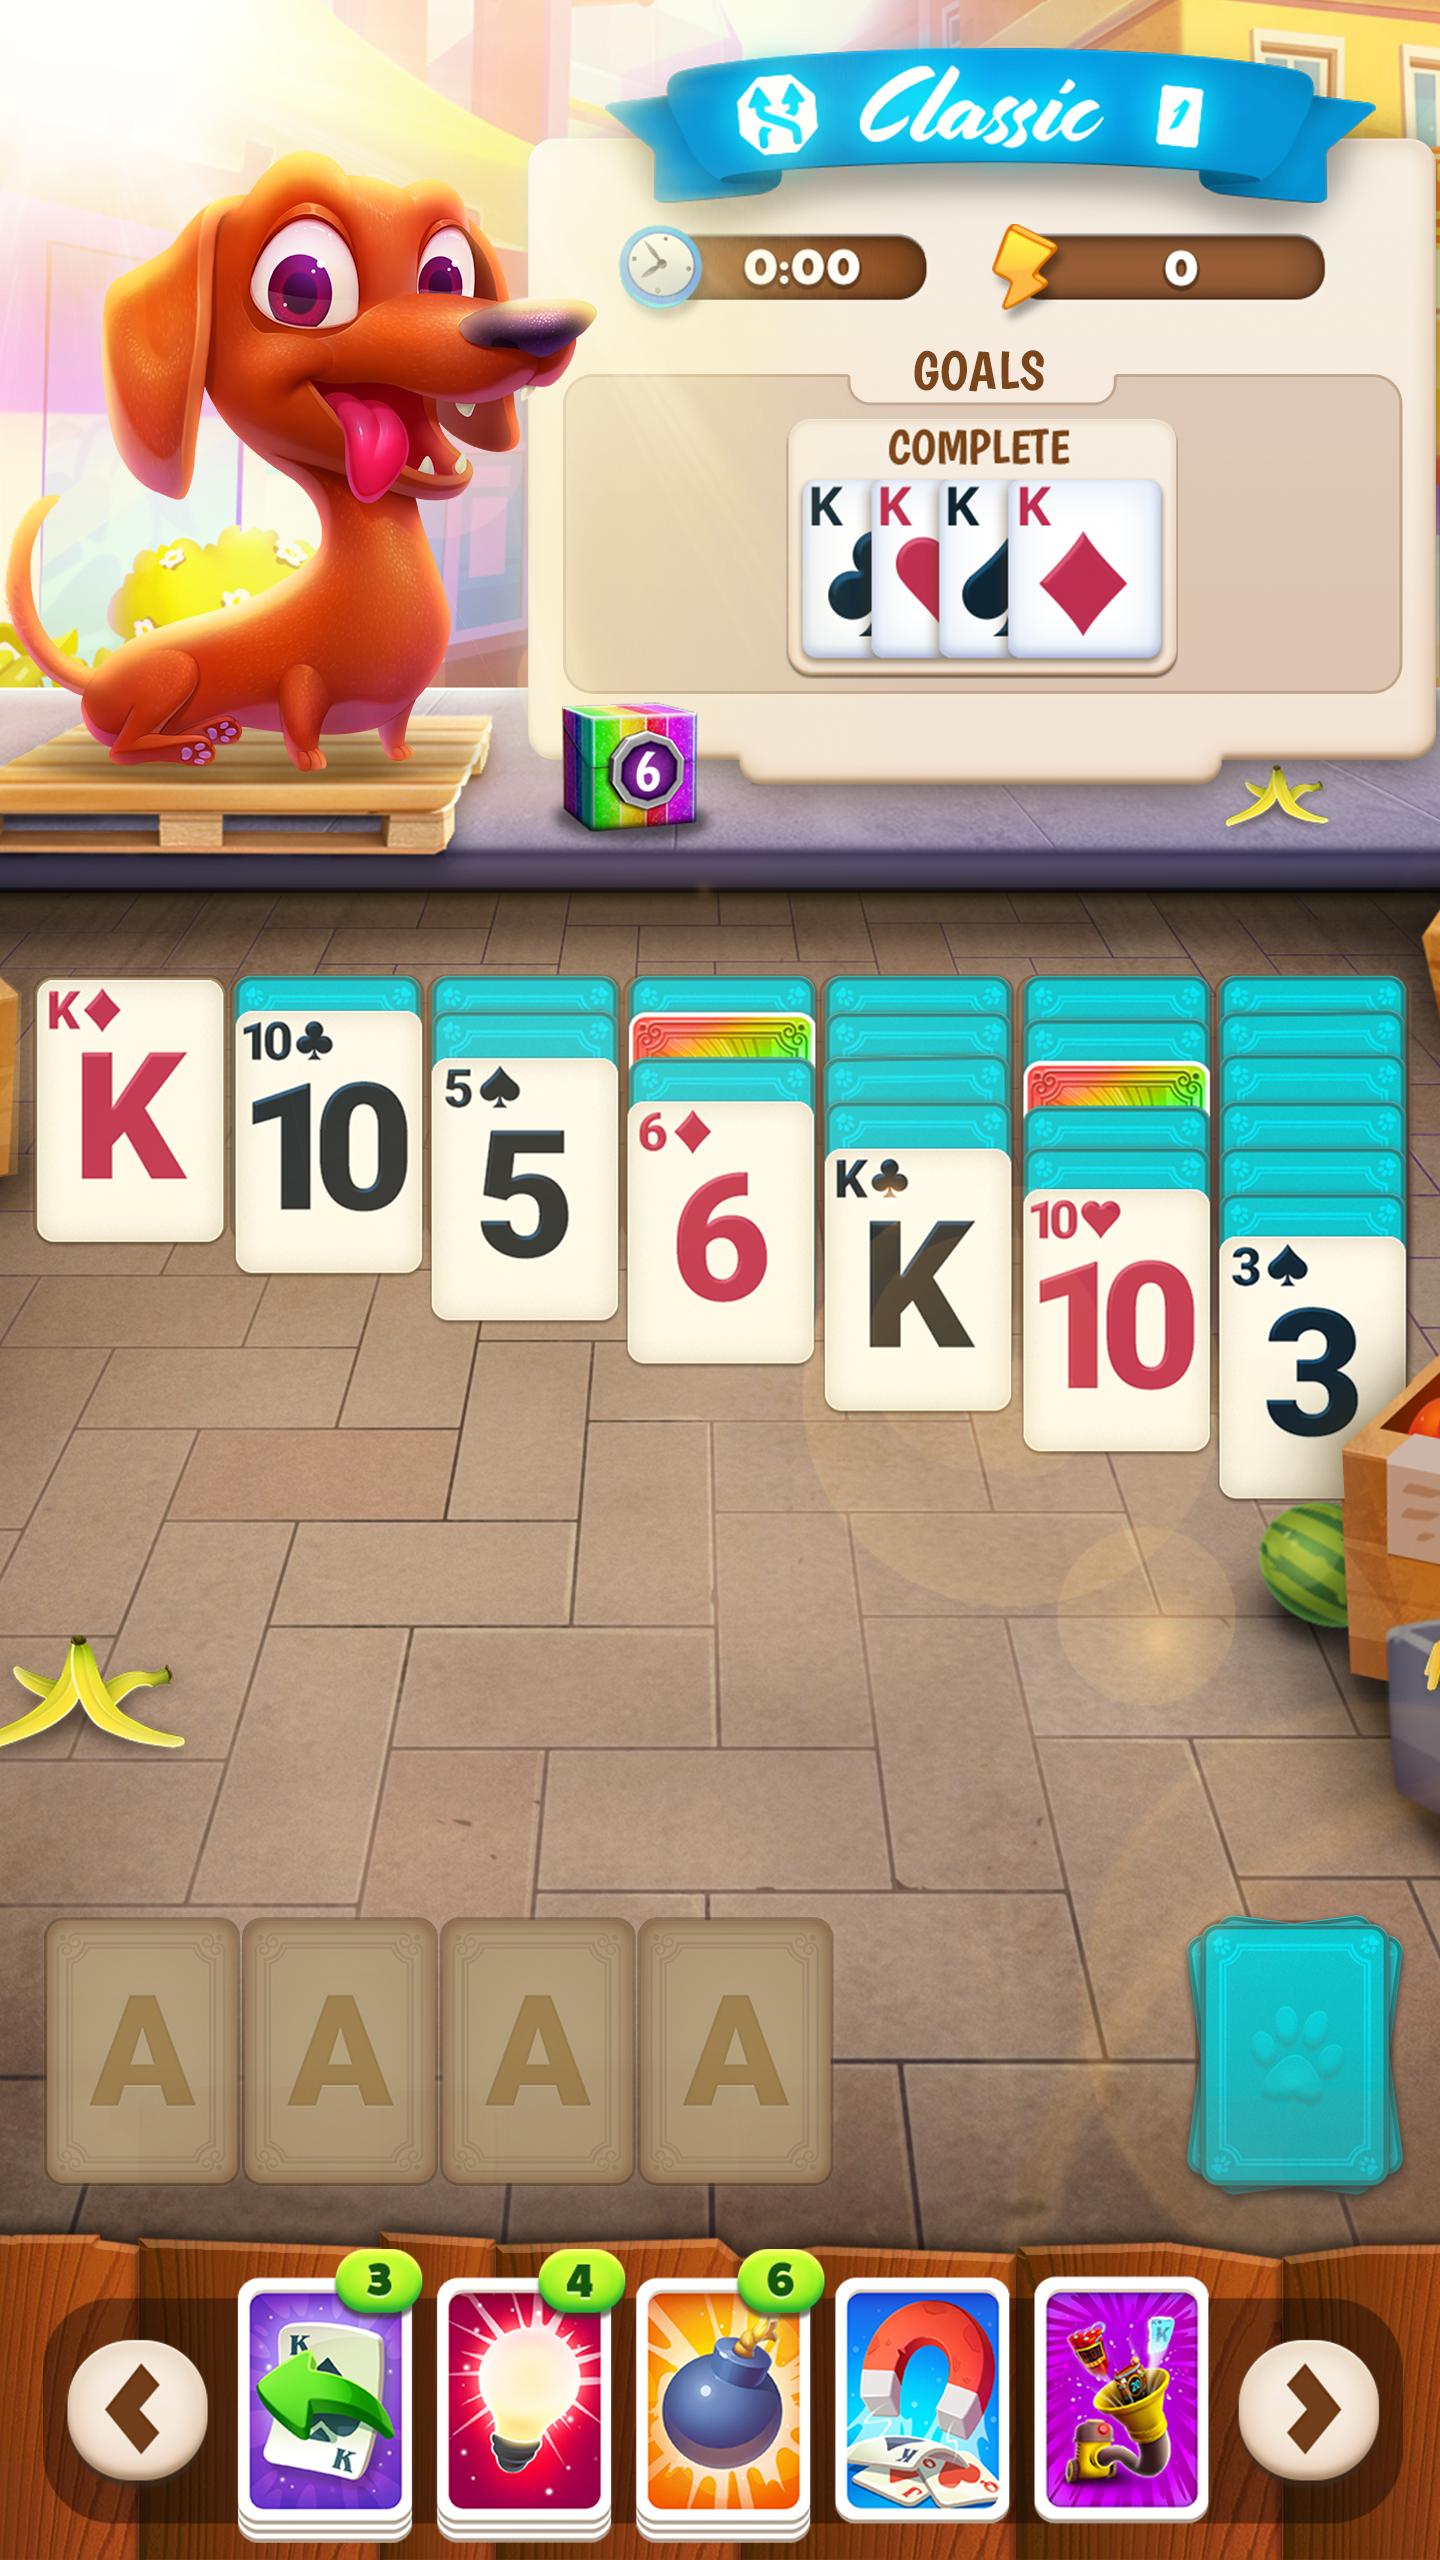 Solitaire Pets Adventure Free Solitaire Fun Game 2.11.572 Screenshot 1